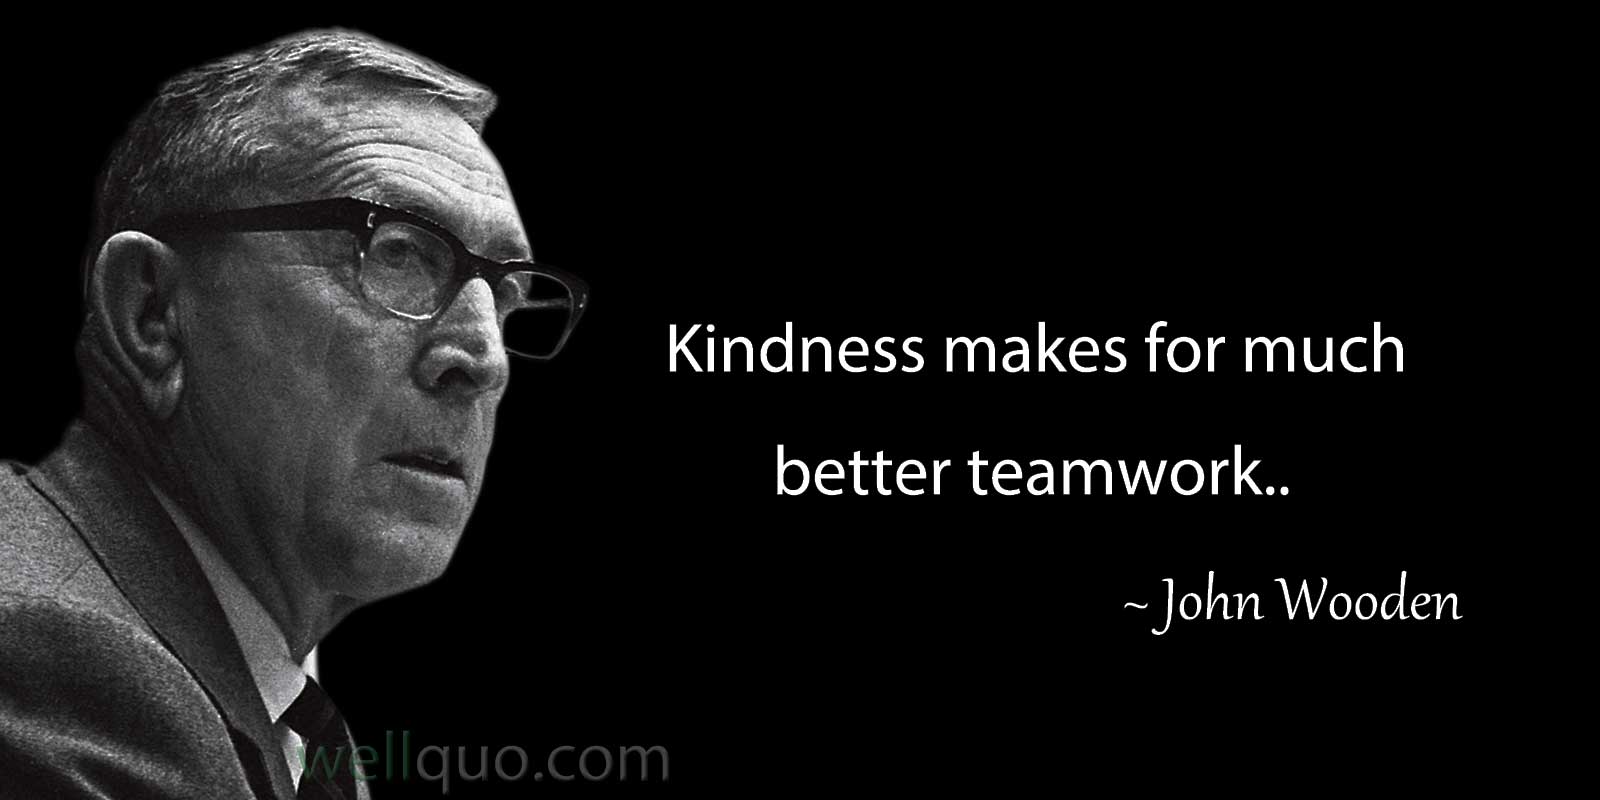 John Wooden Quotes on Team work